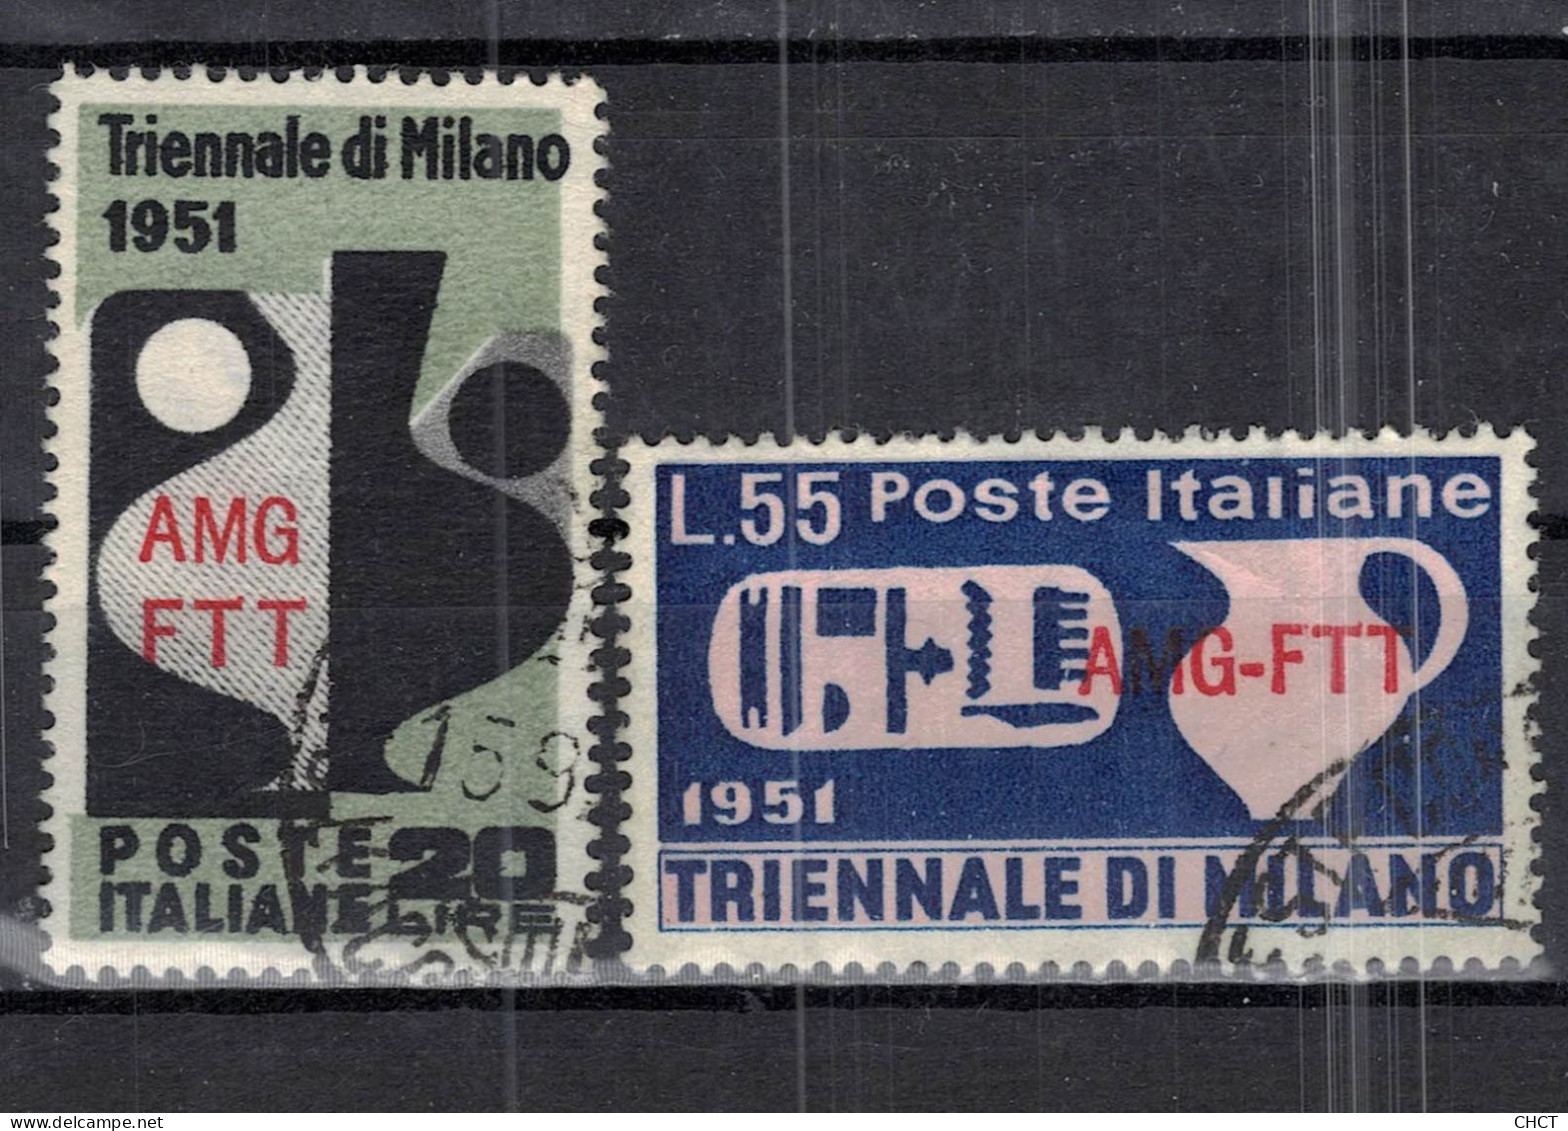 CHCT74 - Milan Triannual, Triennale Di Milano, AMG-FTT Overprint, Trieste A, 1951, Complete Series, Italy - Afgestempeld